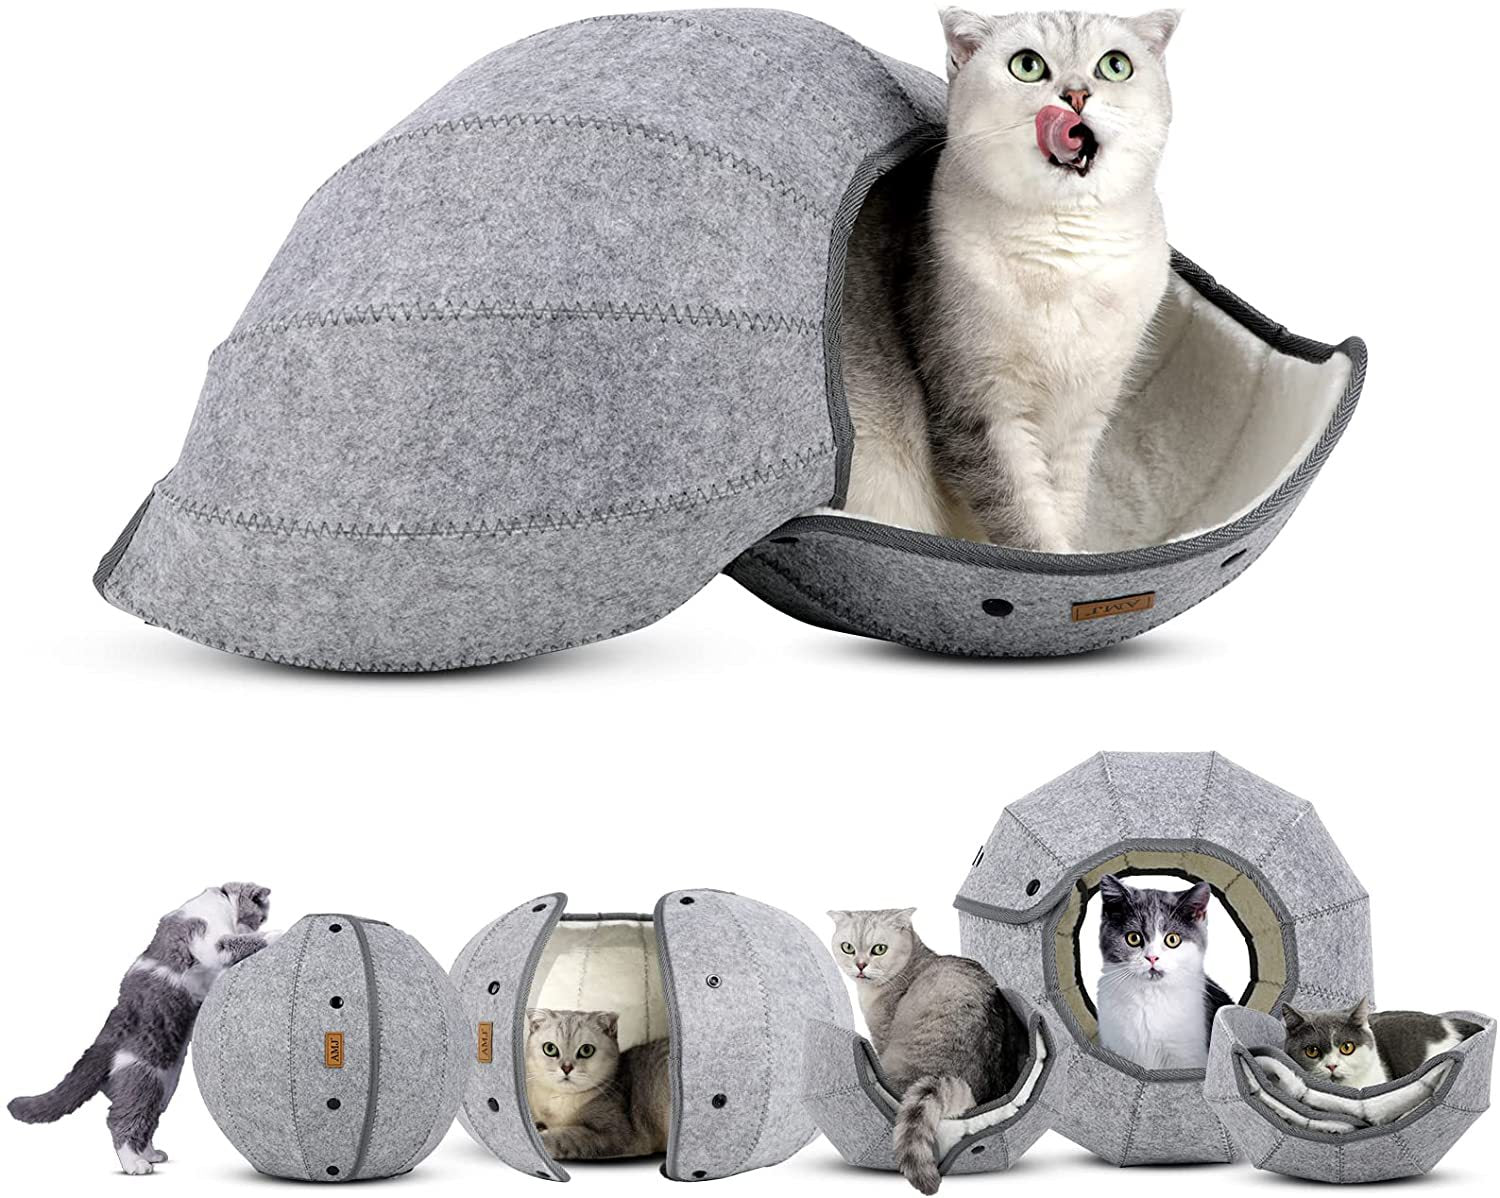 Foldable Cat Tunnel Toy - Multi-Function Cat Cave Bed and Interactive Pet Toy